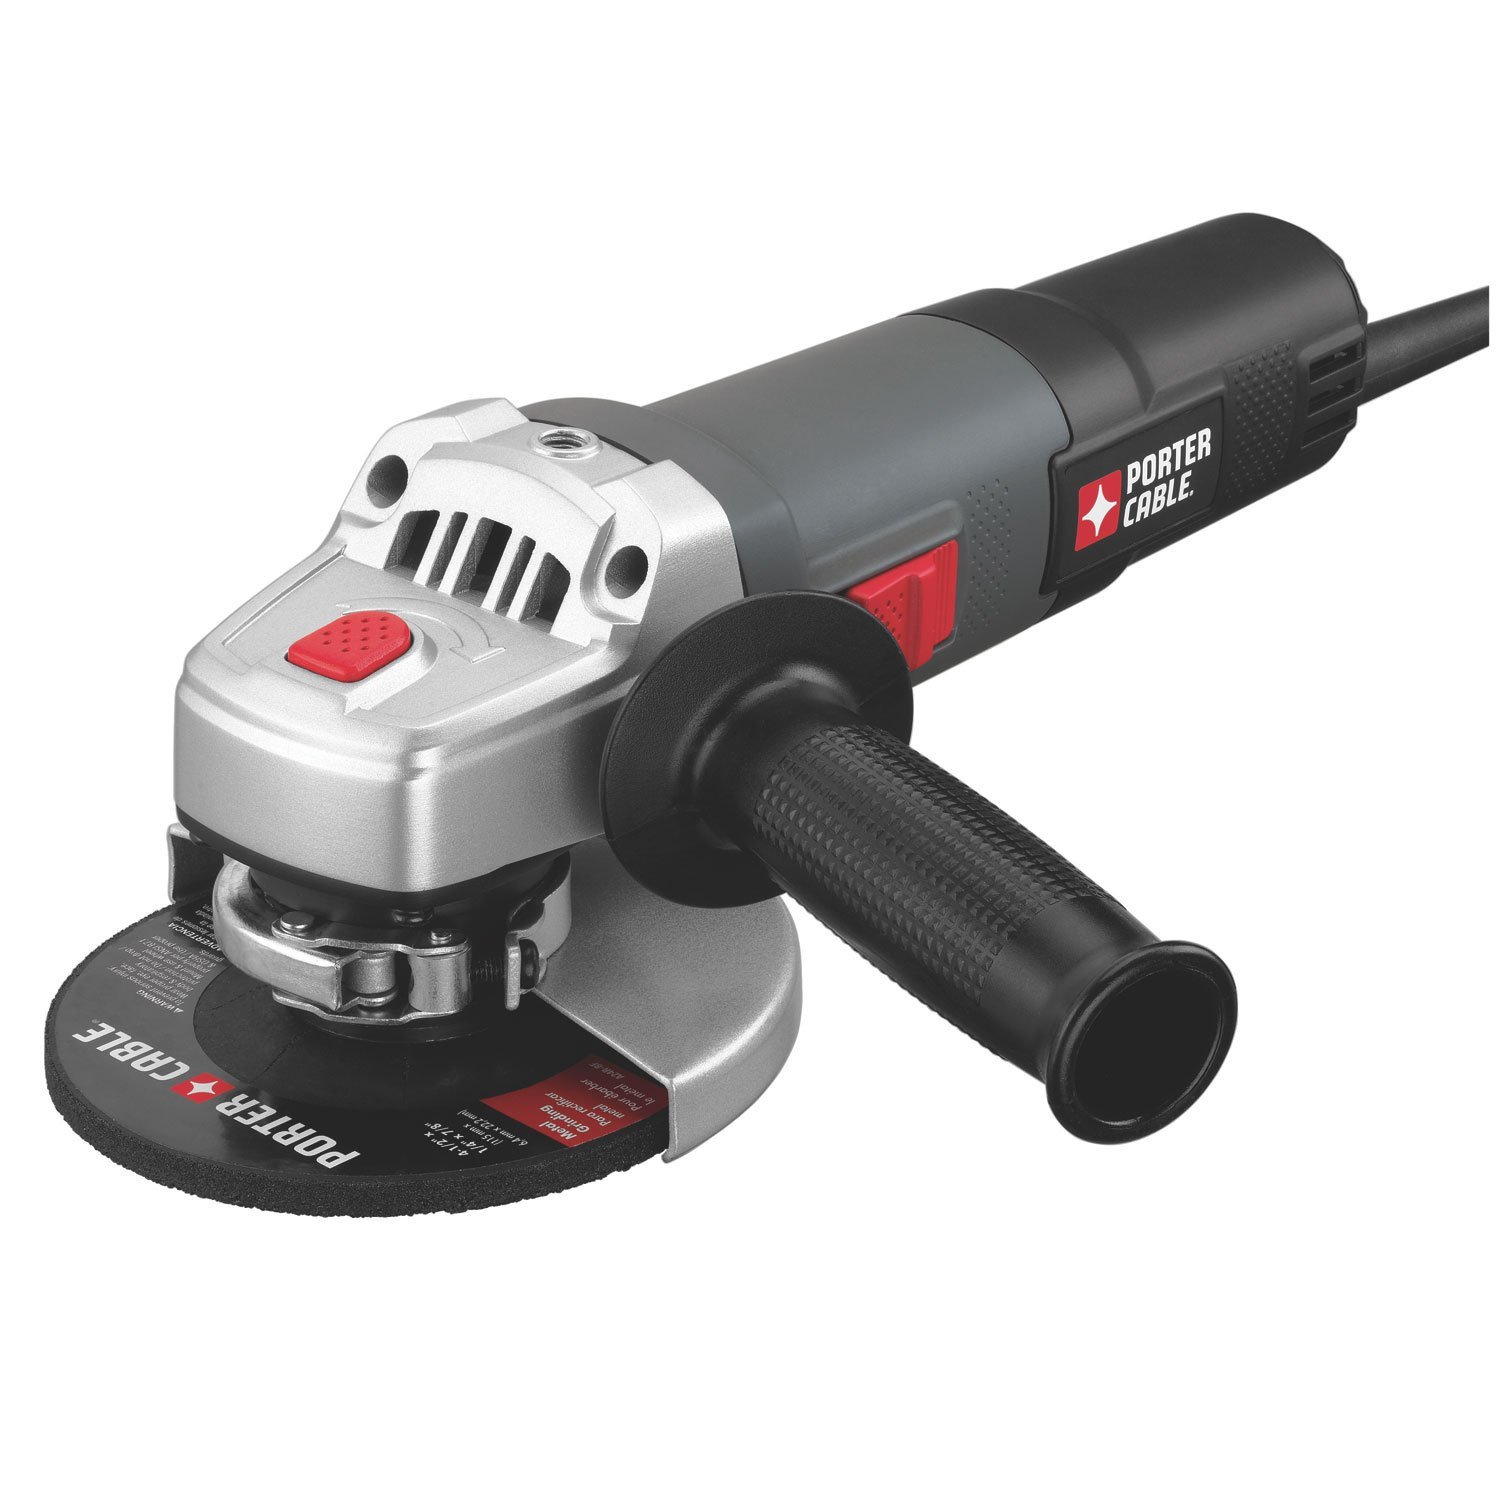 36% off PORTER-CABLE 6.0-Amp 4-1/2-Inch Angle Grinder! Just $23.75!